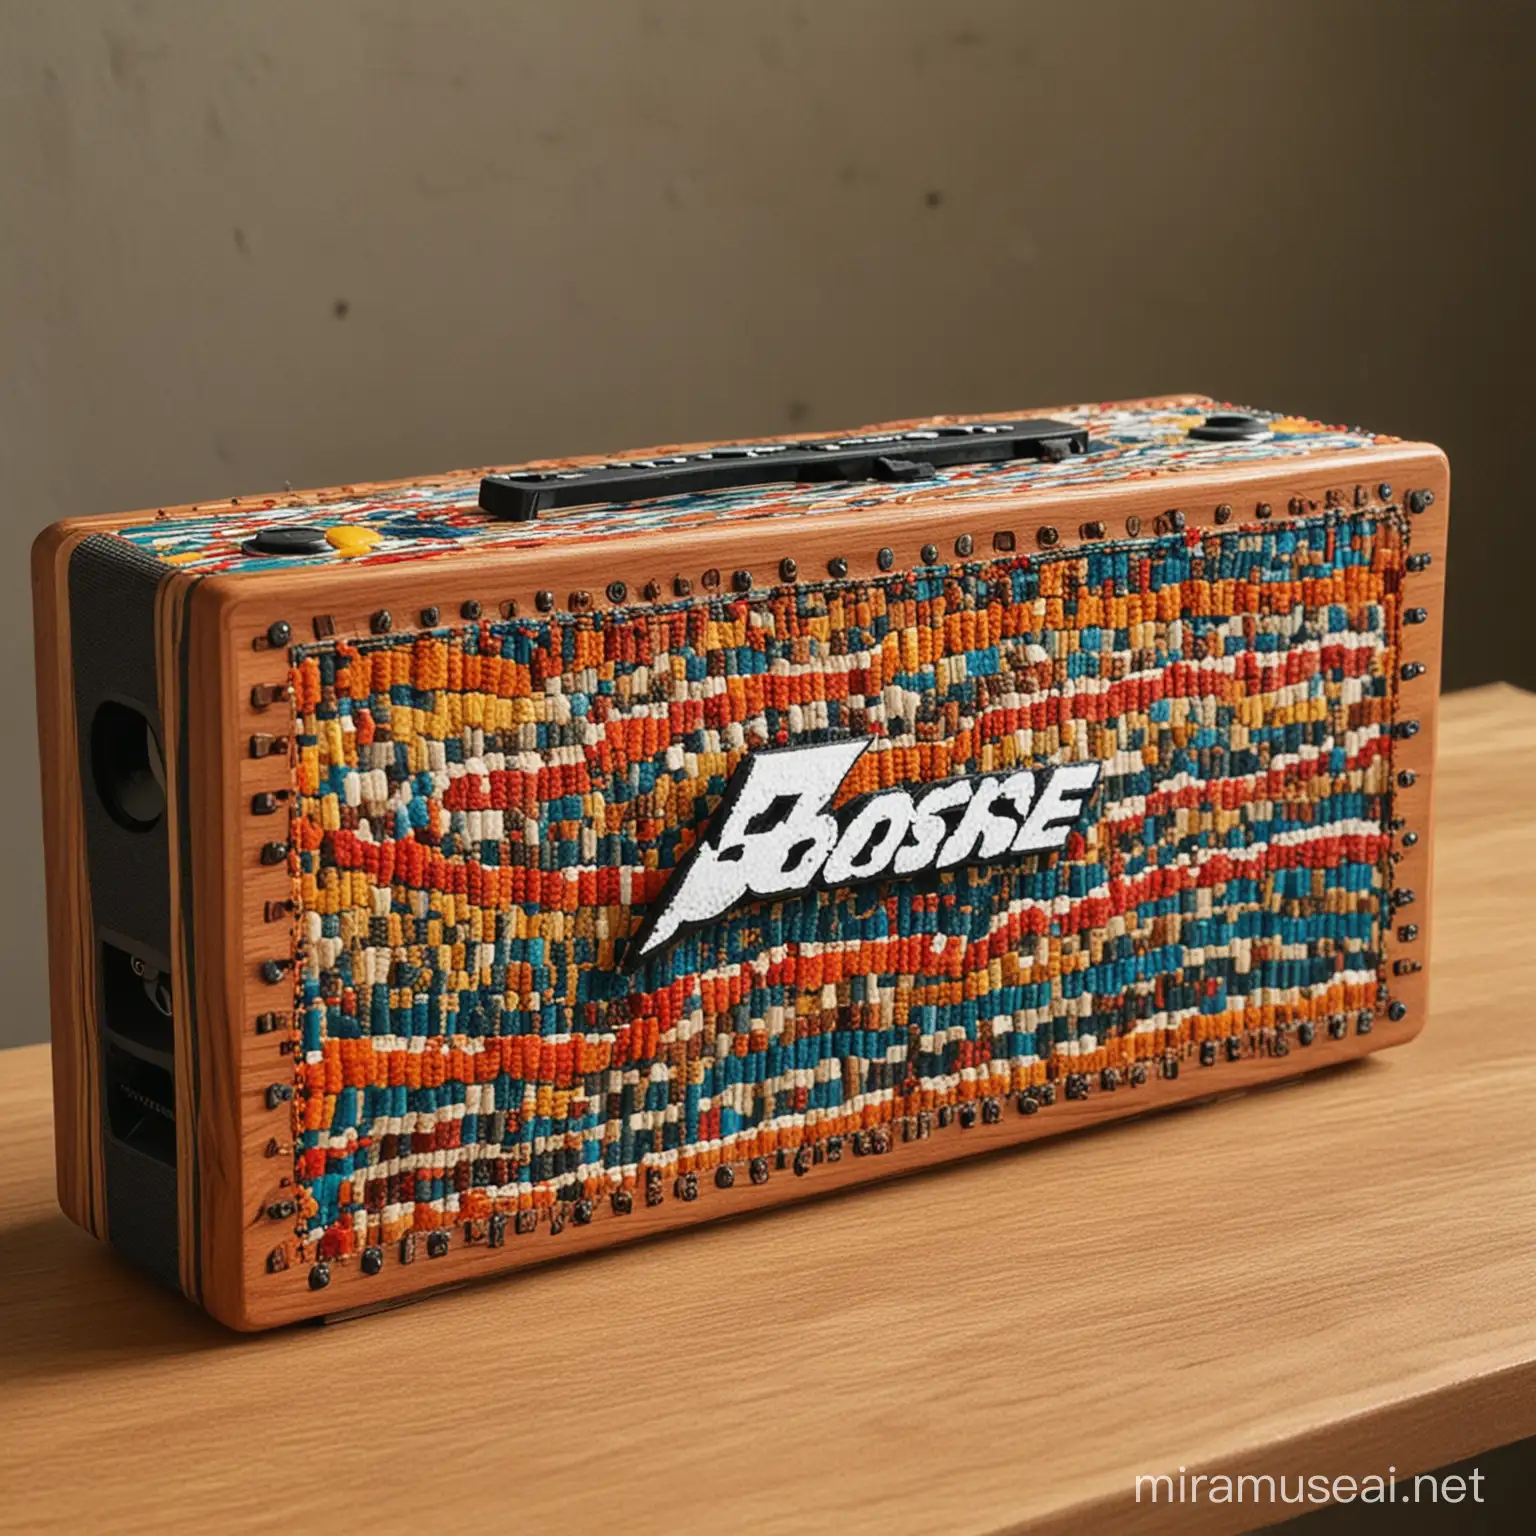 Customized Bose Sound Box with Bhaane Streetwear Gen Z Music Experience